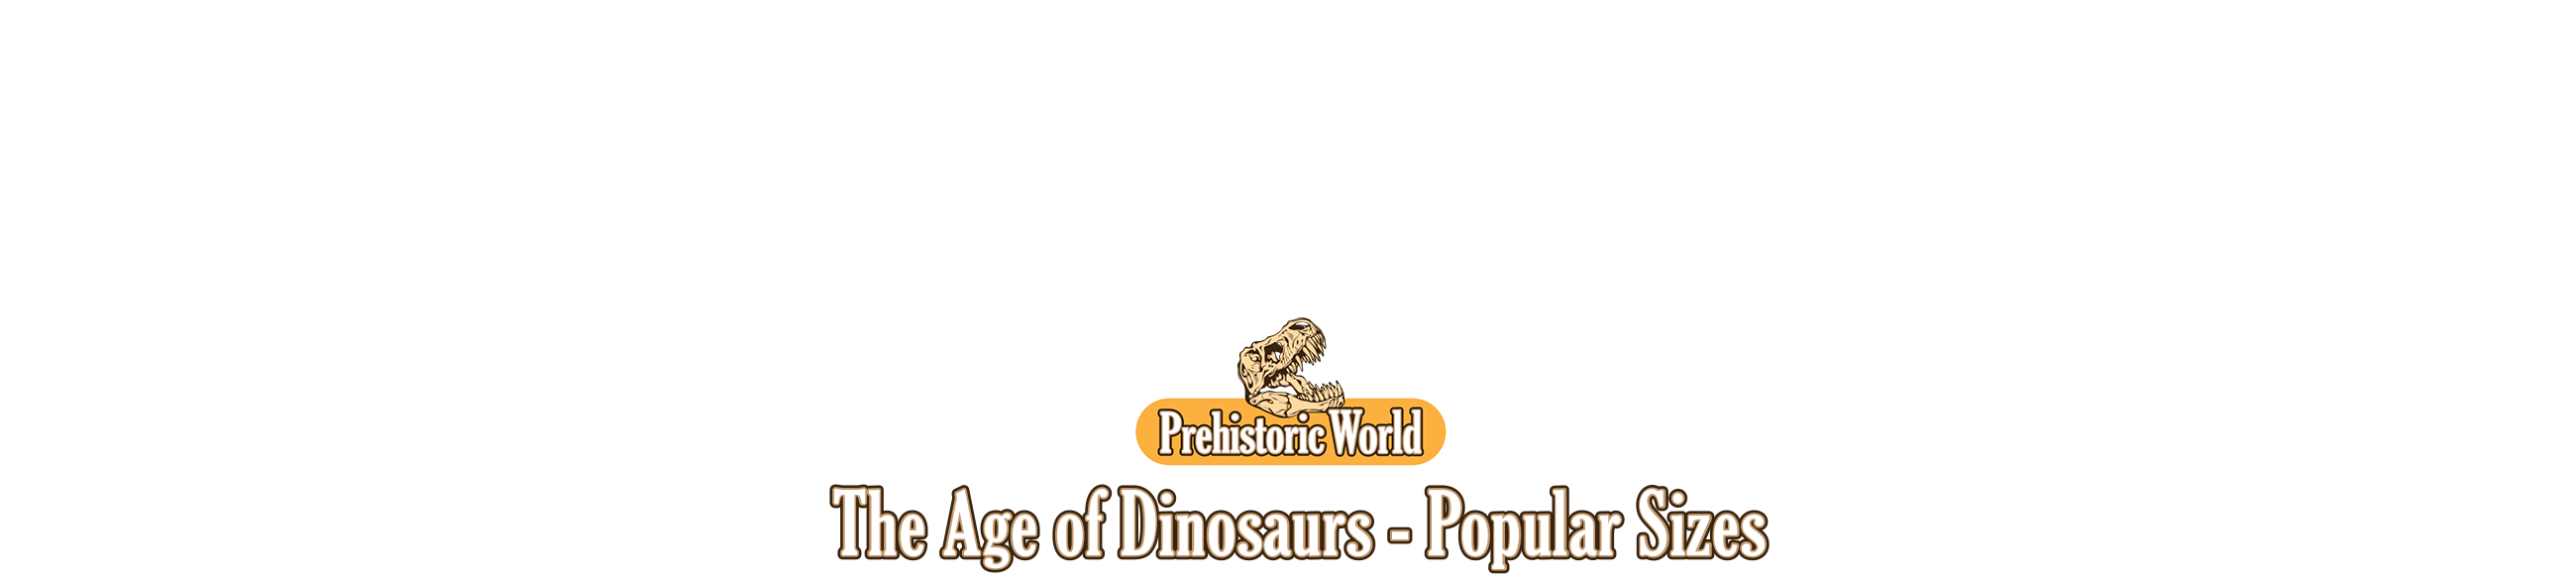 Age of Dinosaurs - Popular Sizes